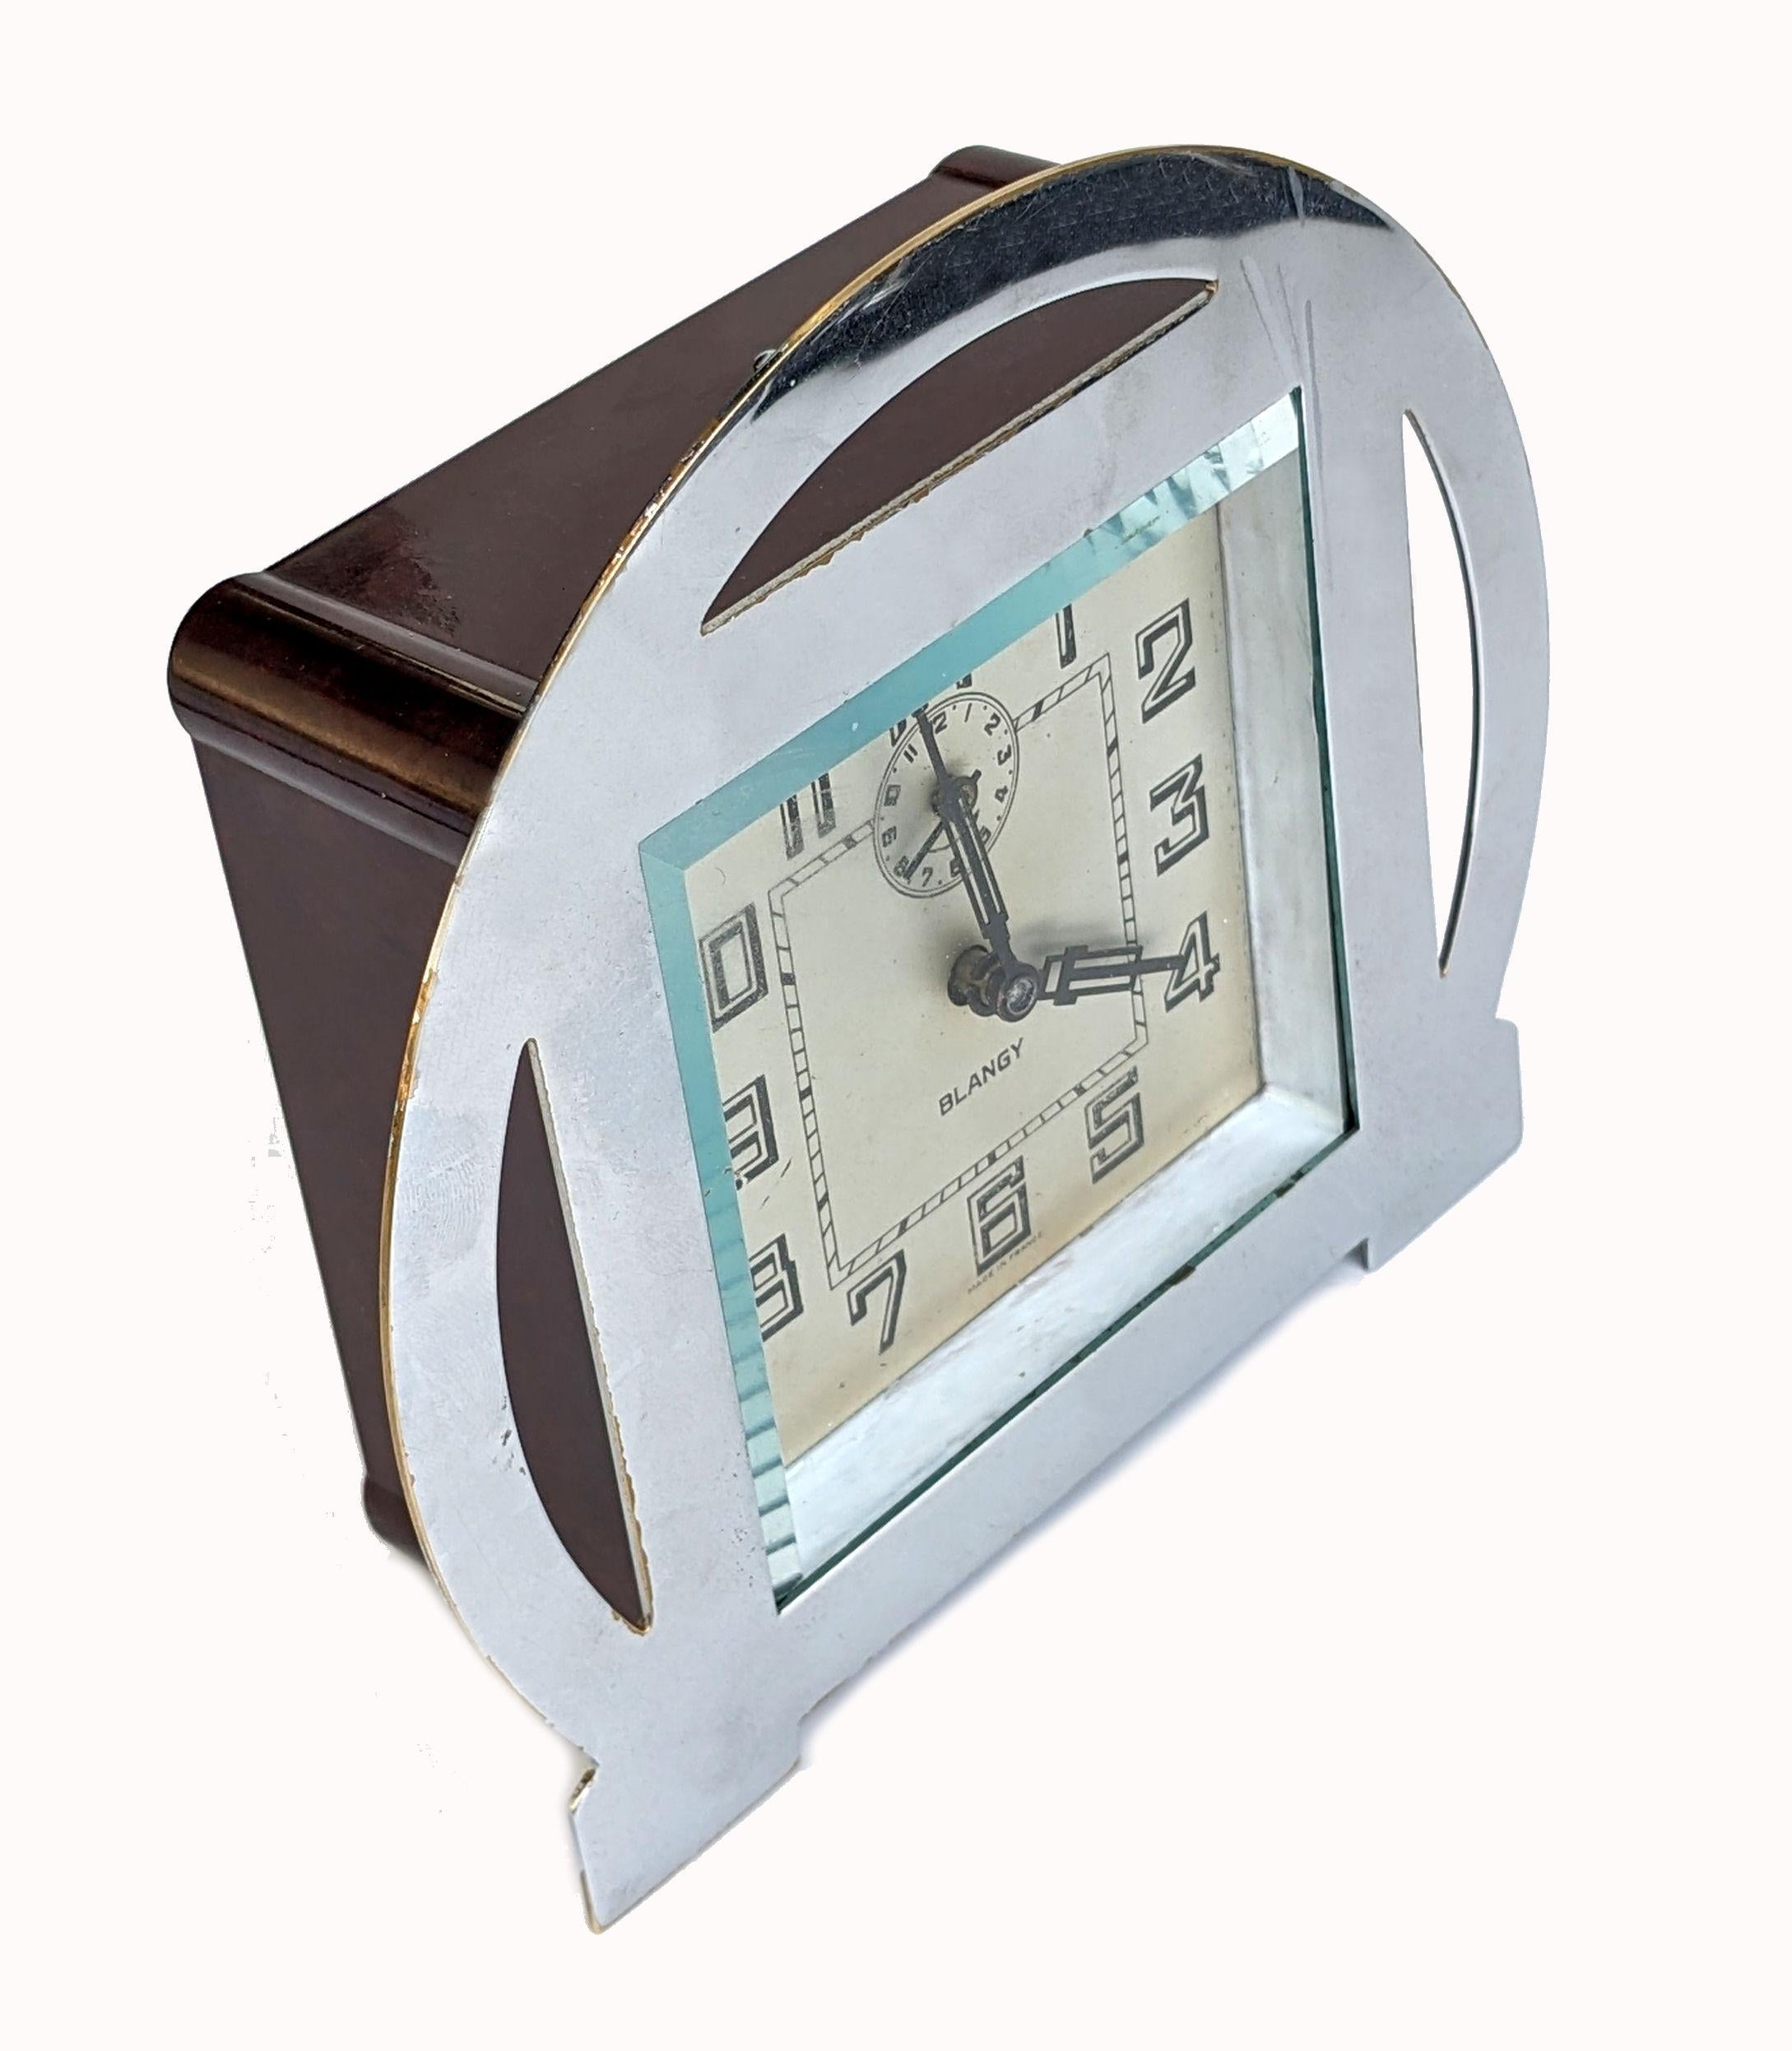 Art Deco Chrome Manual Clock By Blangy, French, c1930 In Good Condition For Sale In Devon, England